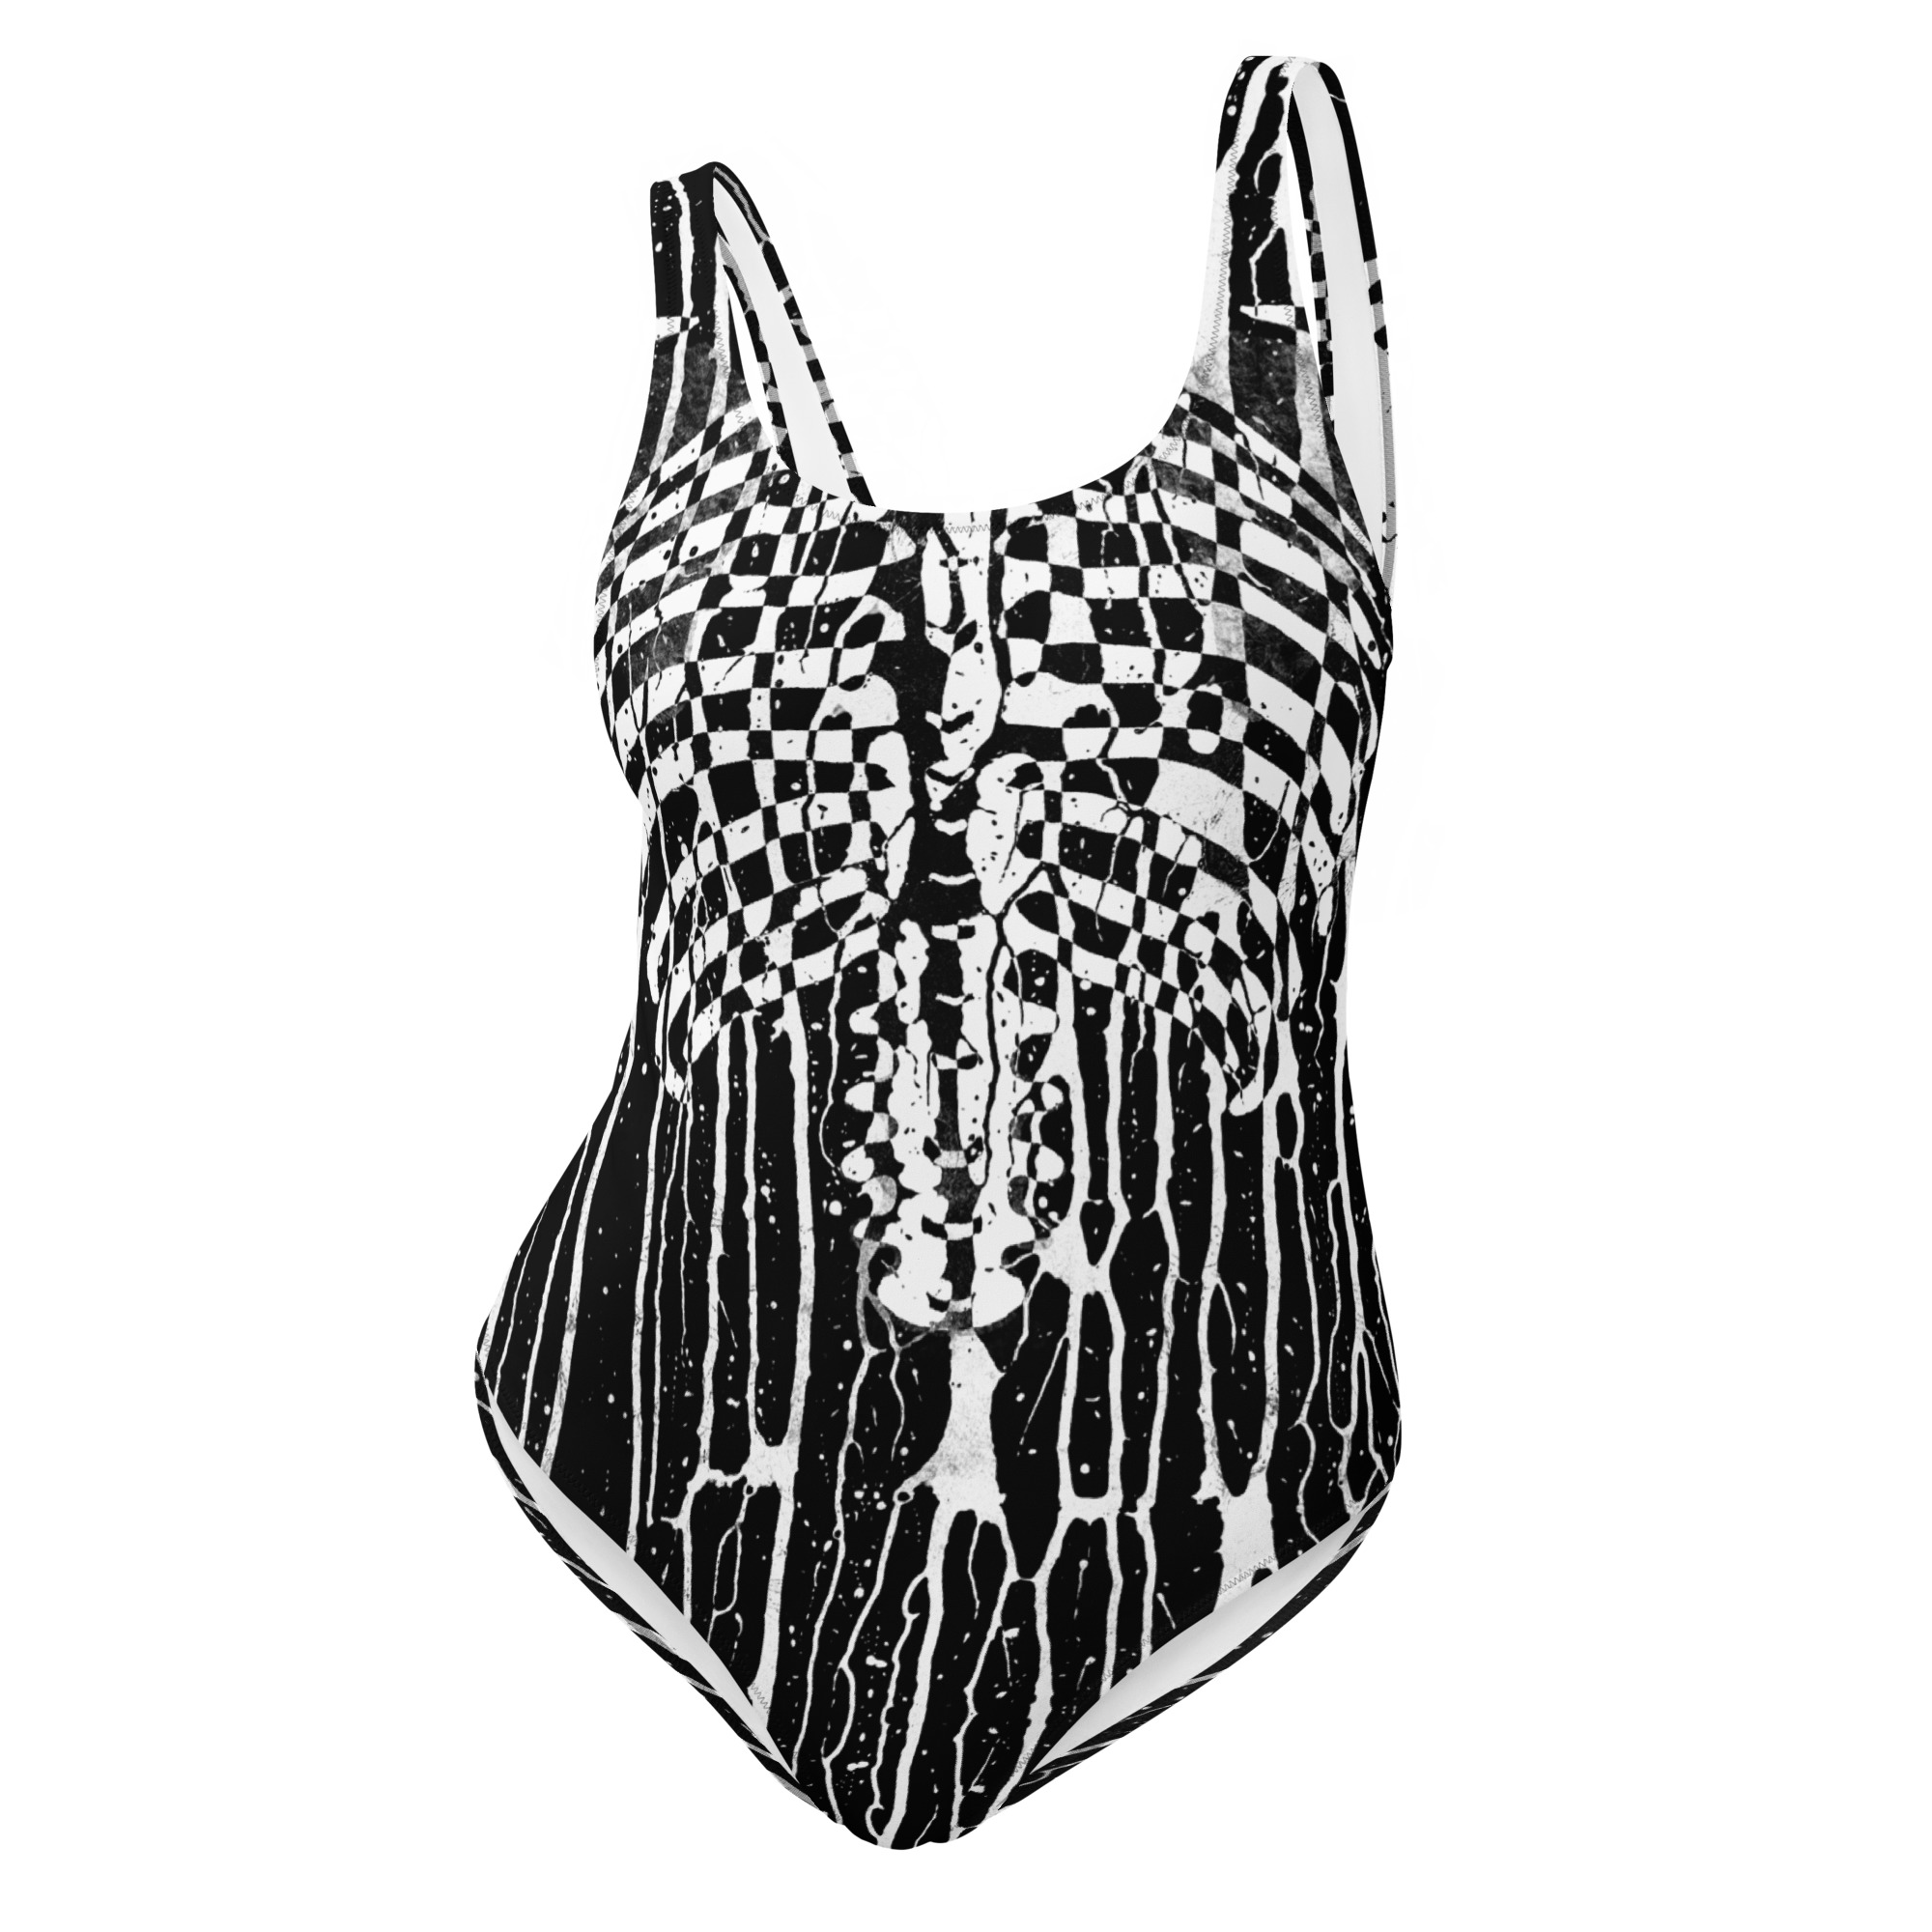 Featured image for “Grunge Drip Bones - One-Piece Swimsuit”